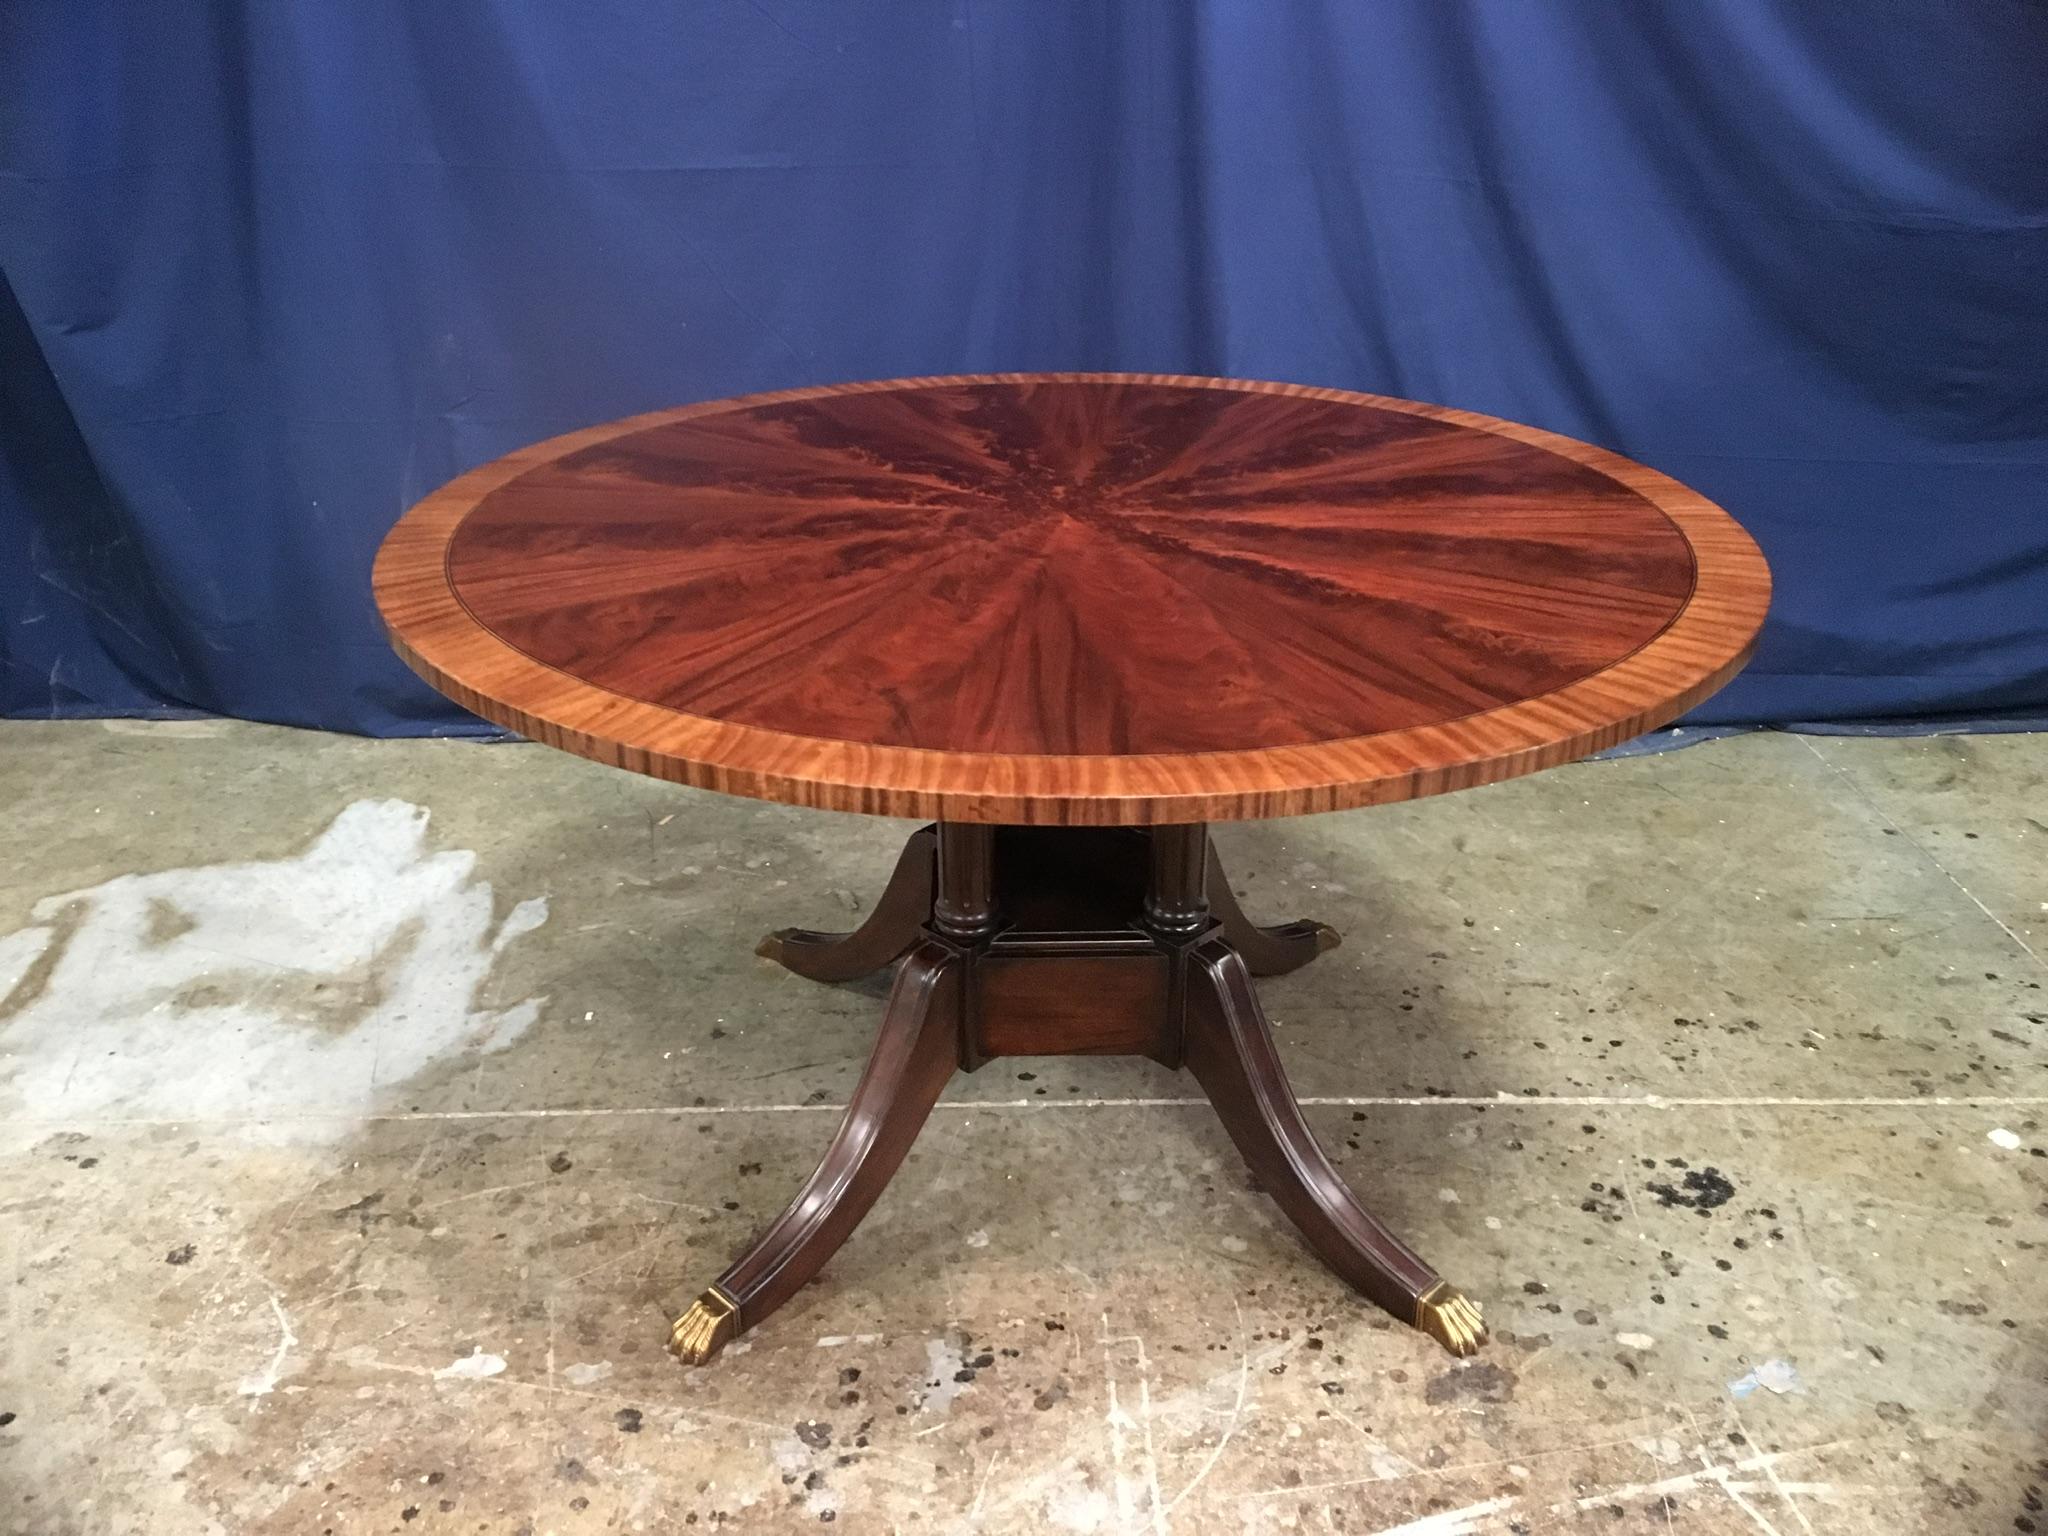 This is made-to-order round traditional mahogany dining table made in the Leighton Hall shop. It features field of radial cut West African swirly crotch mahogany and a border of satinwood. There is an inlay of ebony and white maple which separates